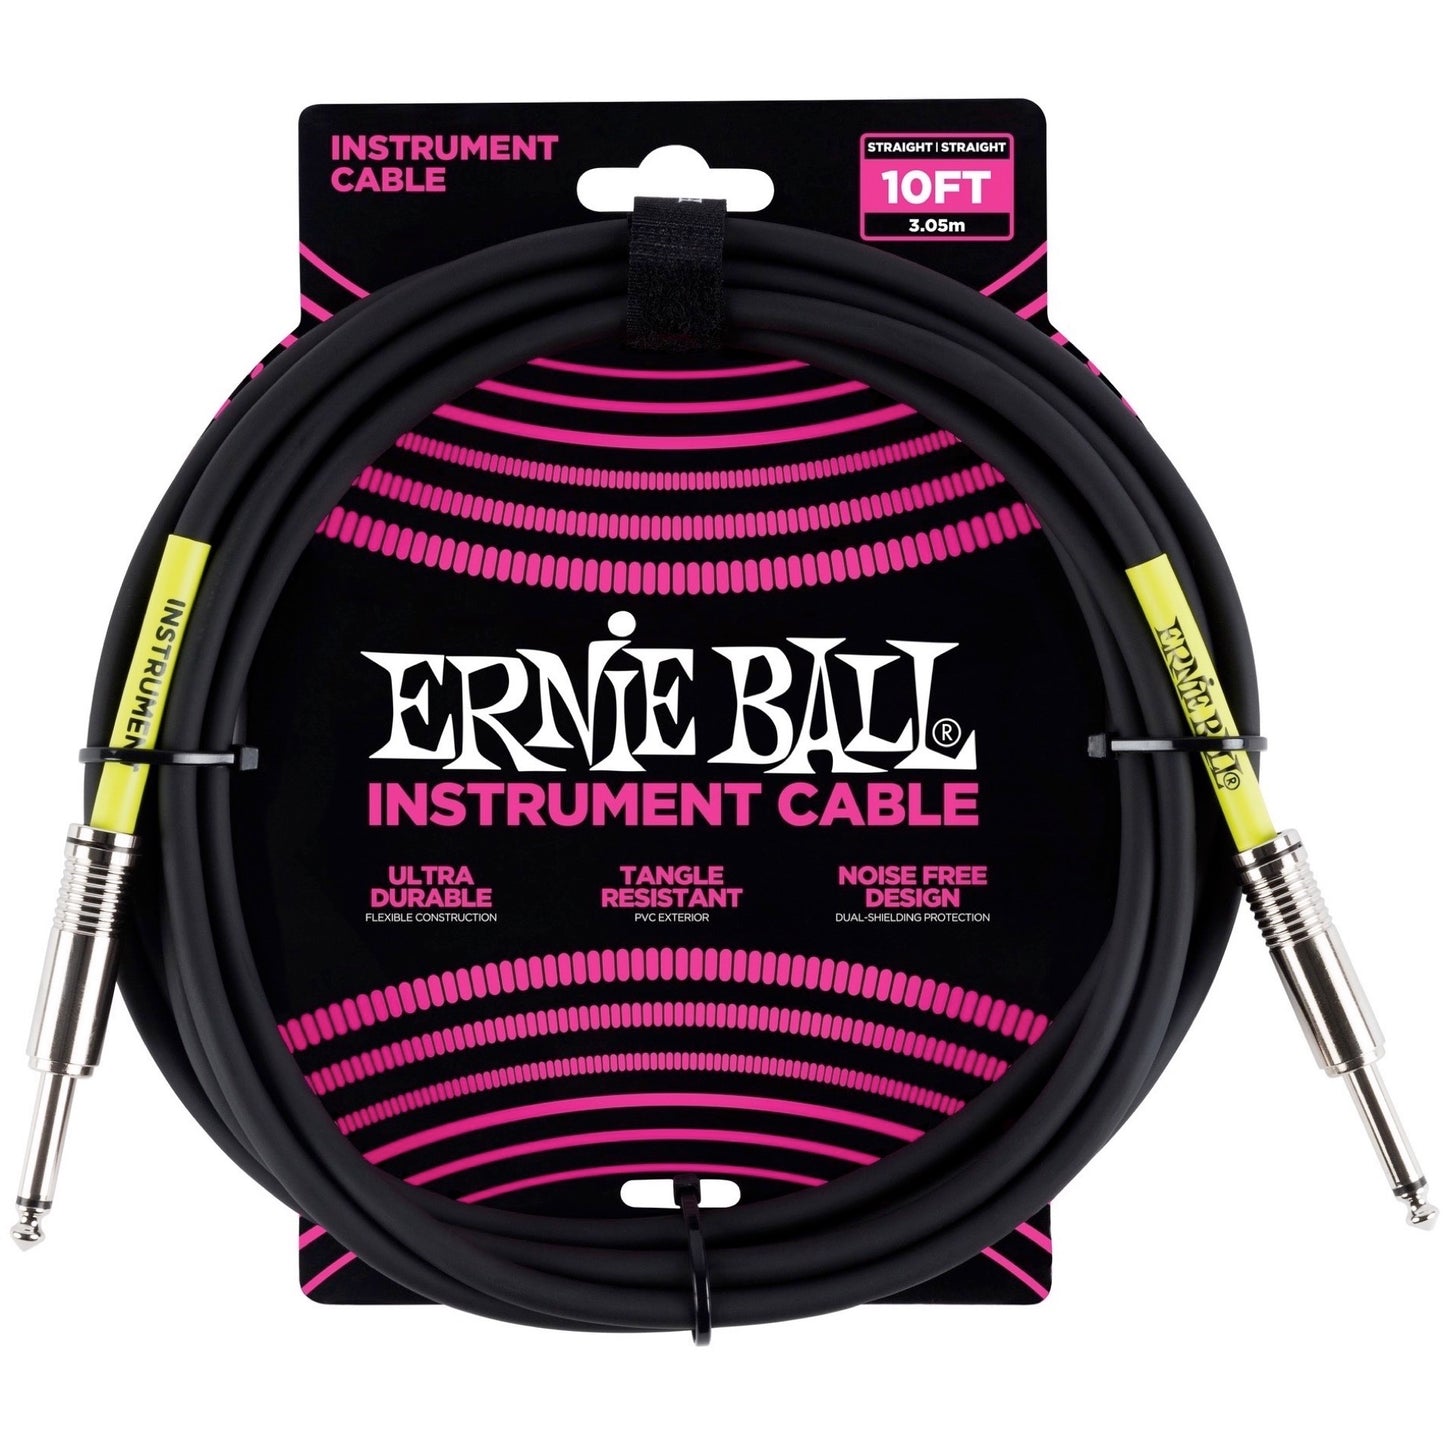 Ernie Ball Instrument Cable, 10 Foot